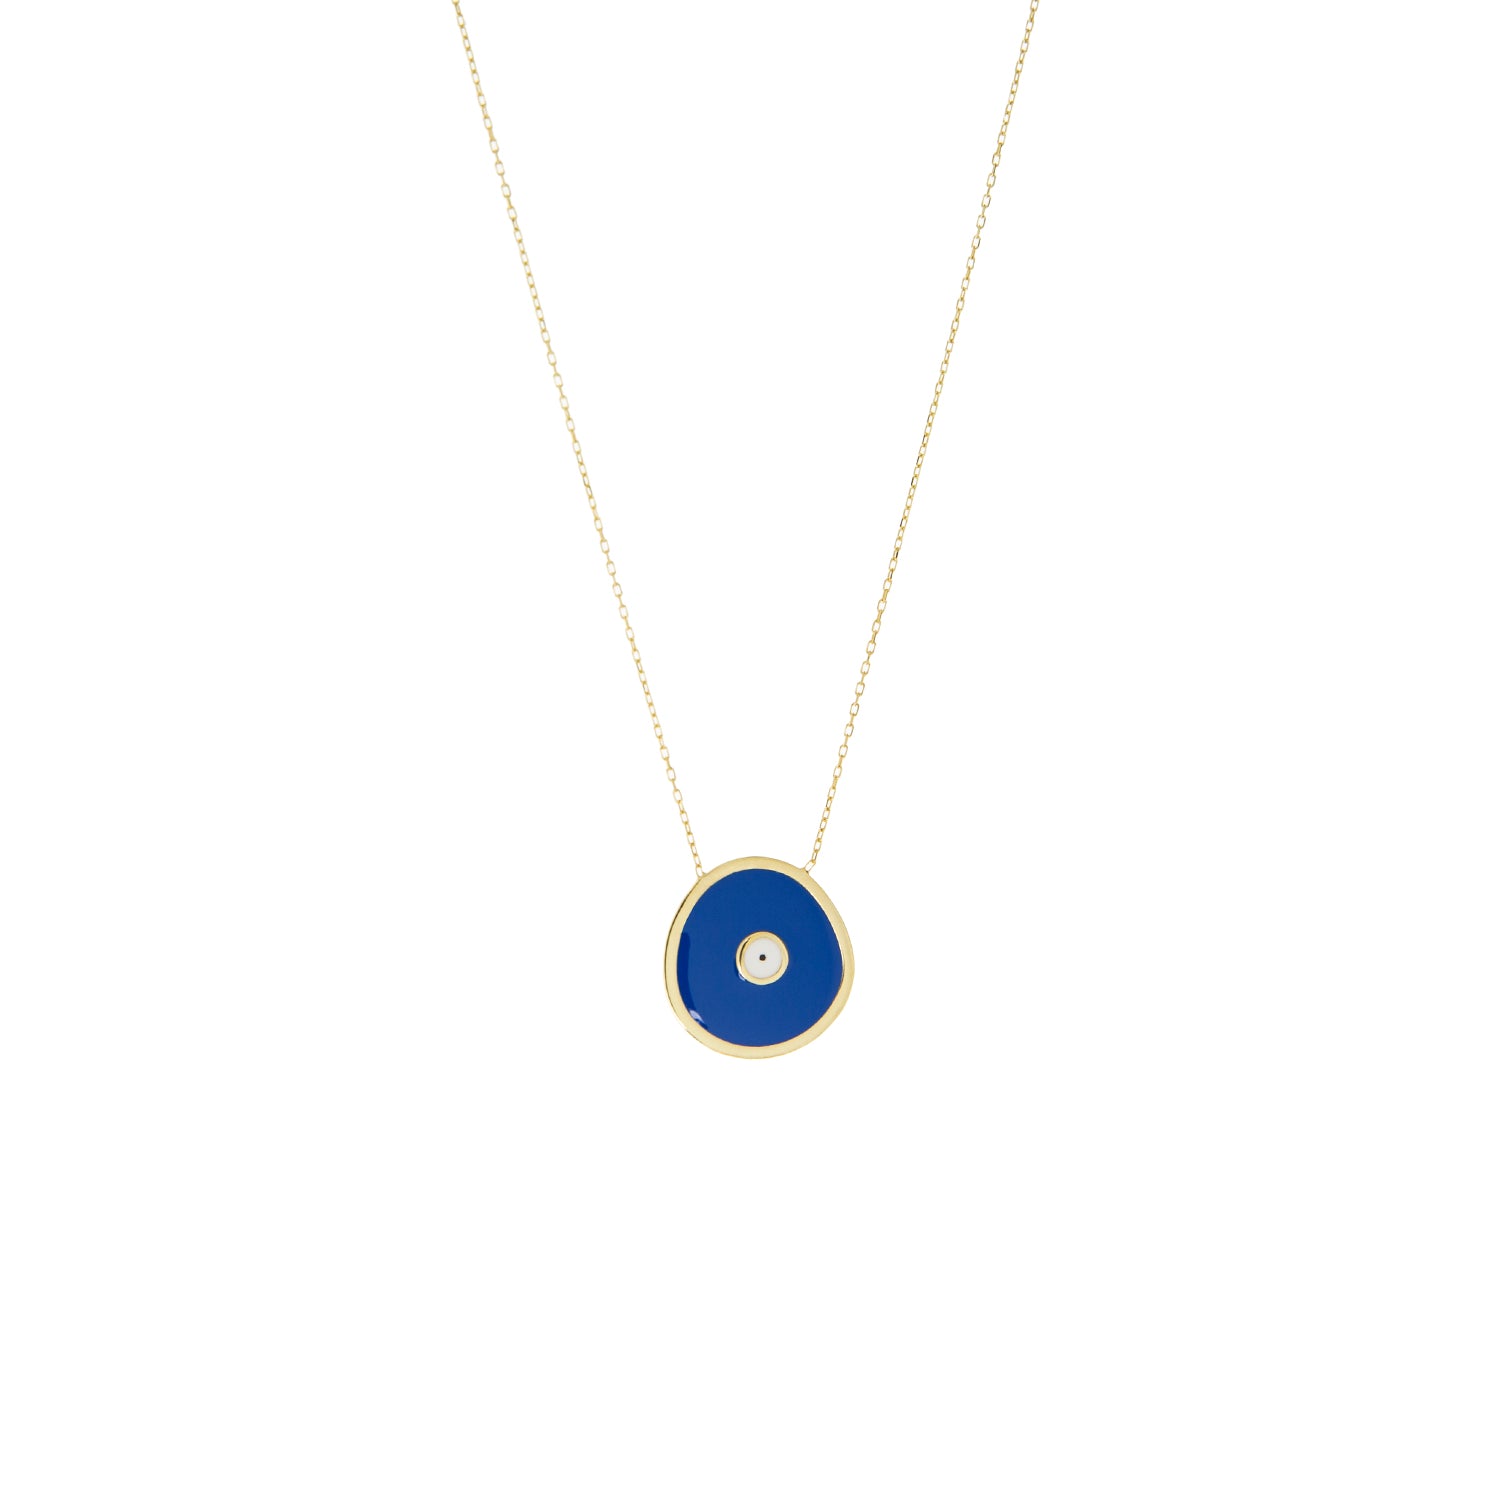 gold plated delicate chain with round enamel evil eye pendant